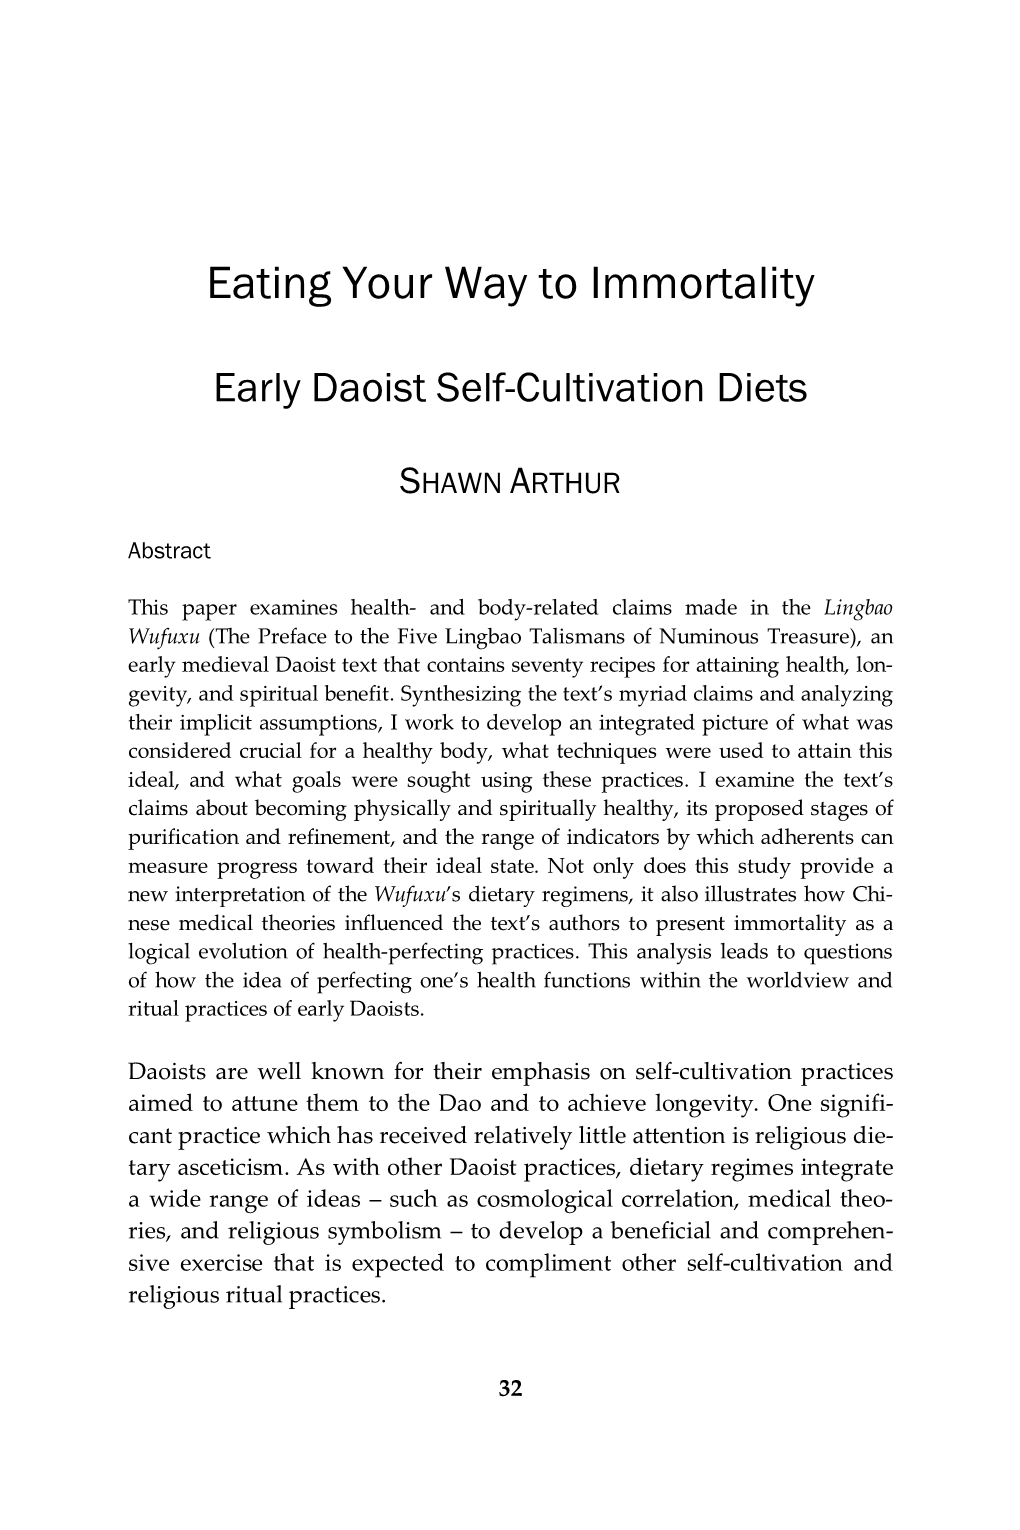 Eating Your Way to Immortality